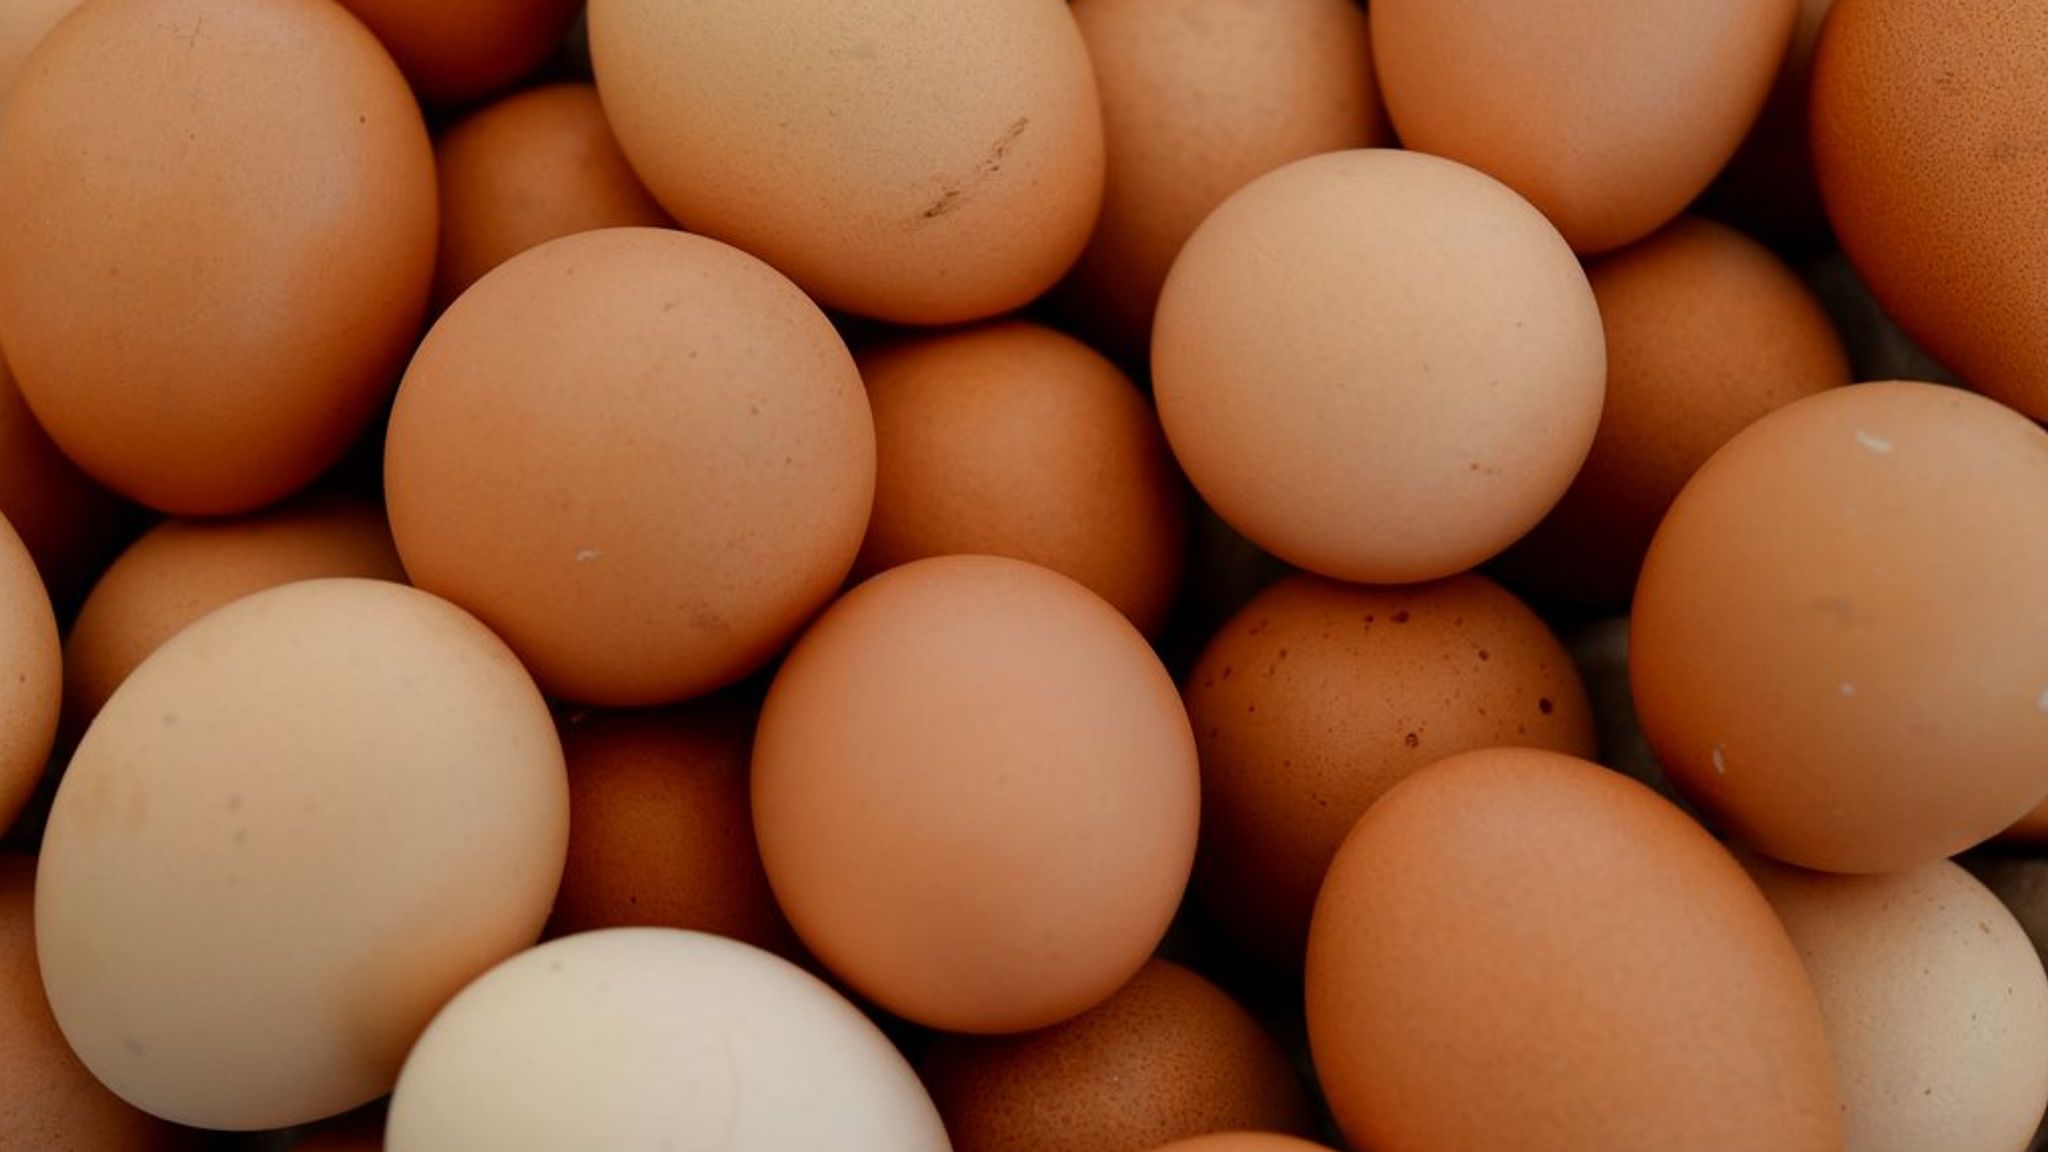 asda-and-lidl-restrict-egg-sales-following-supply-disruption-uk-news